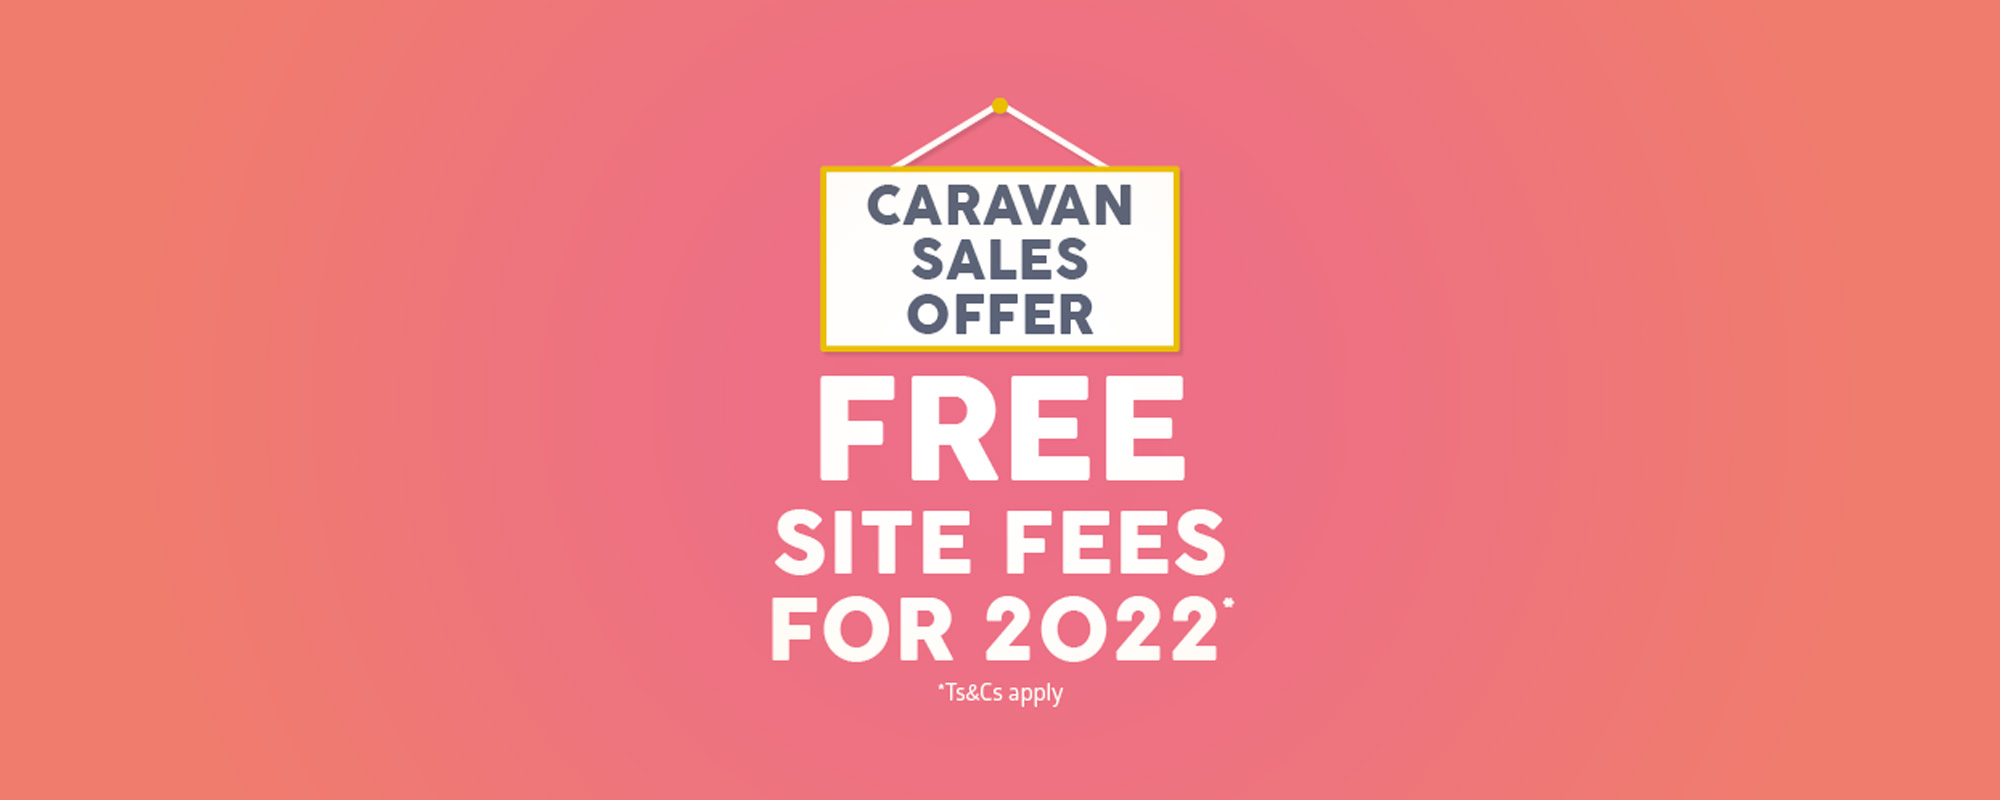 Free Site Fees For 2022 When You Buy A Holiday Home At Golden Sands